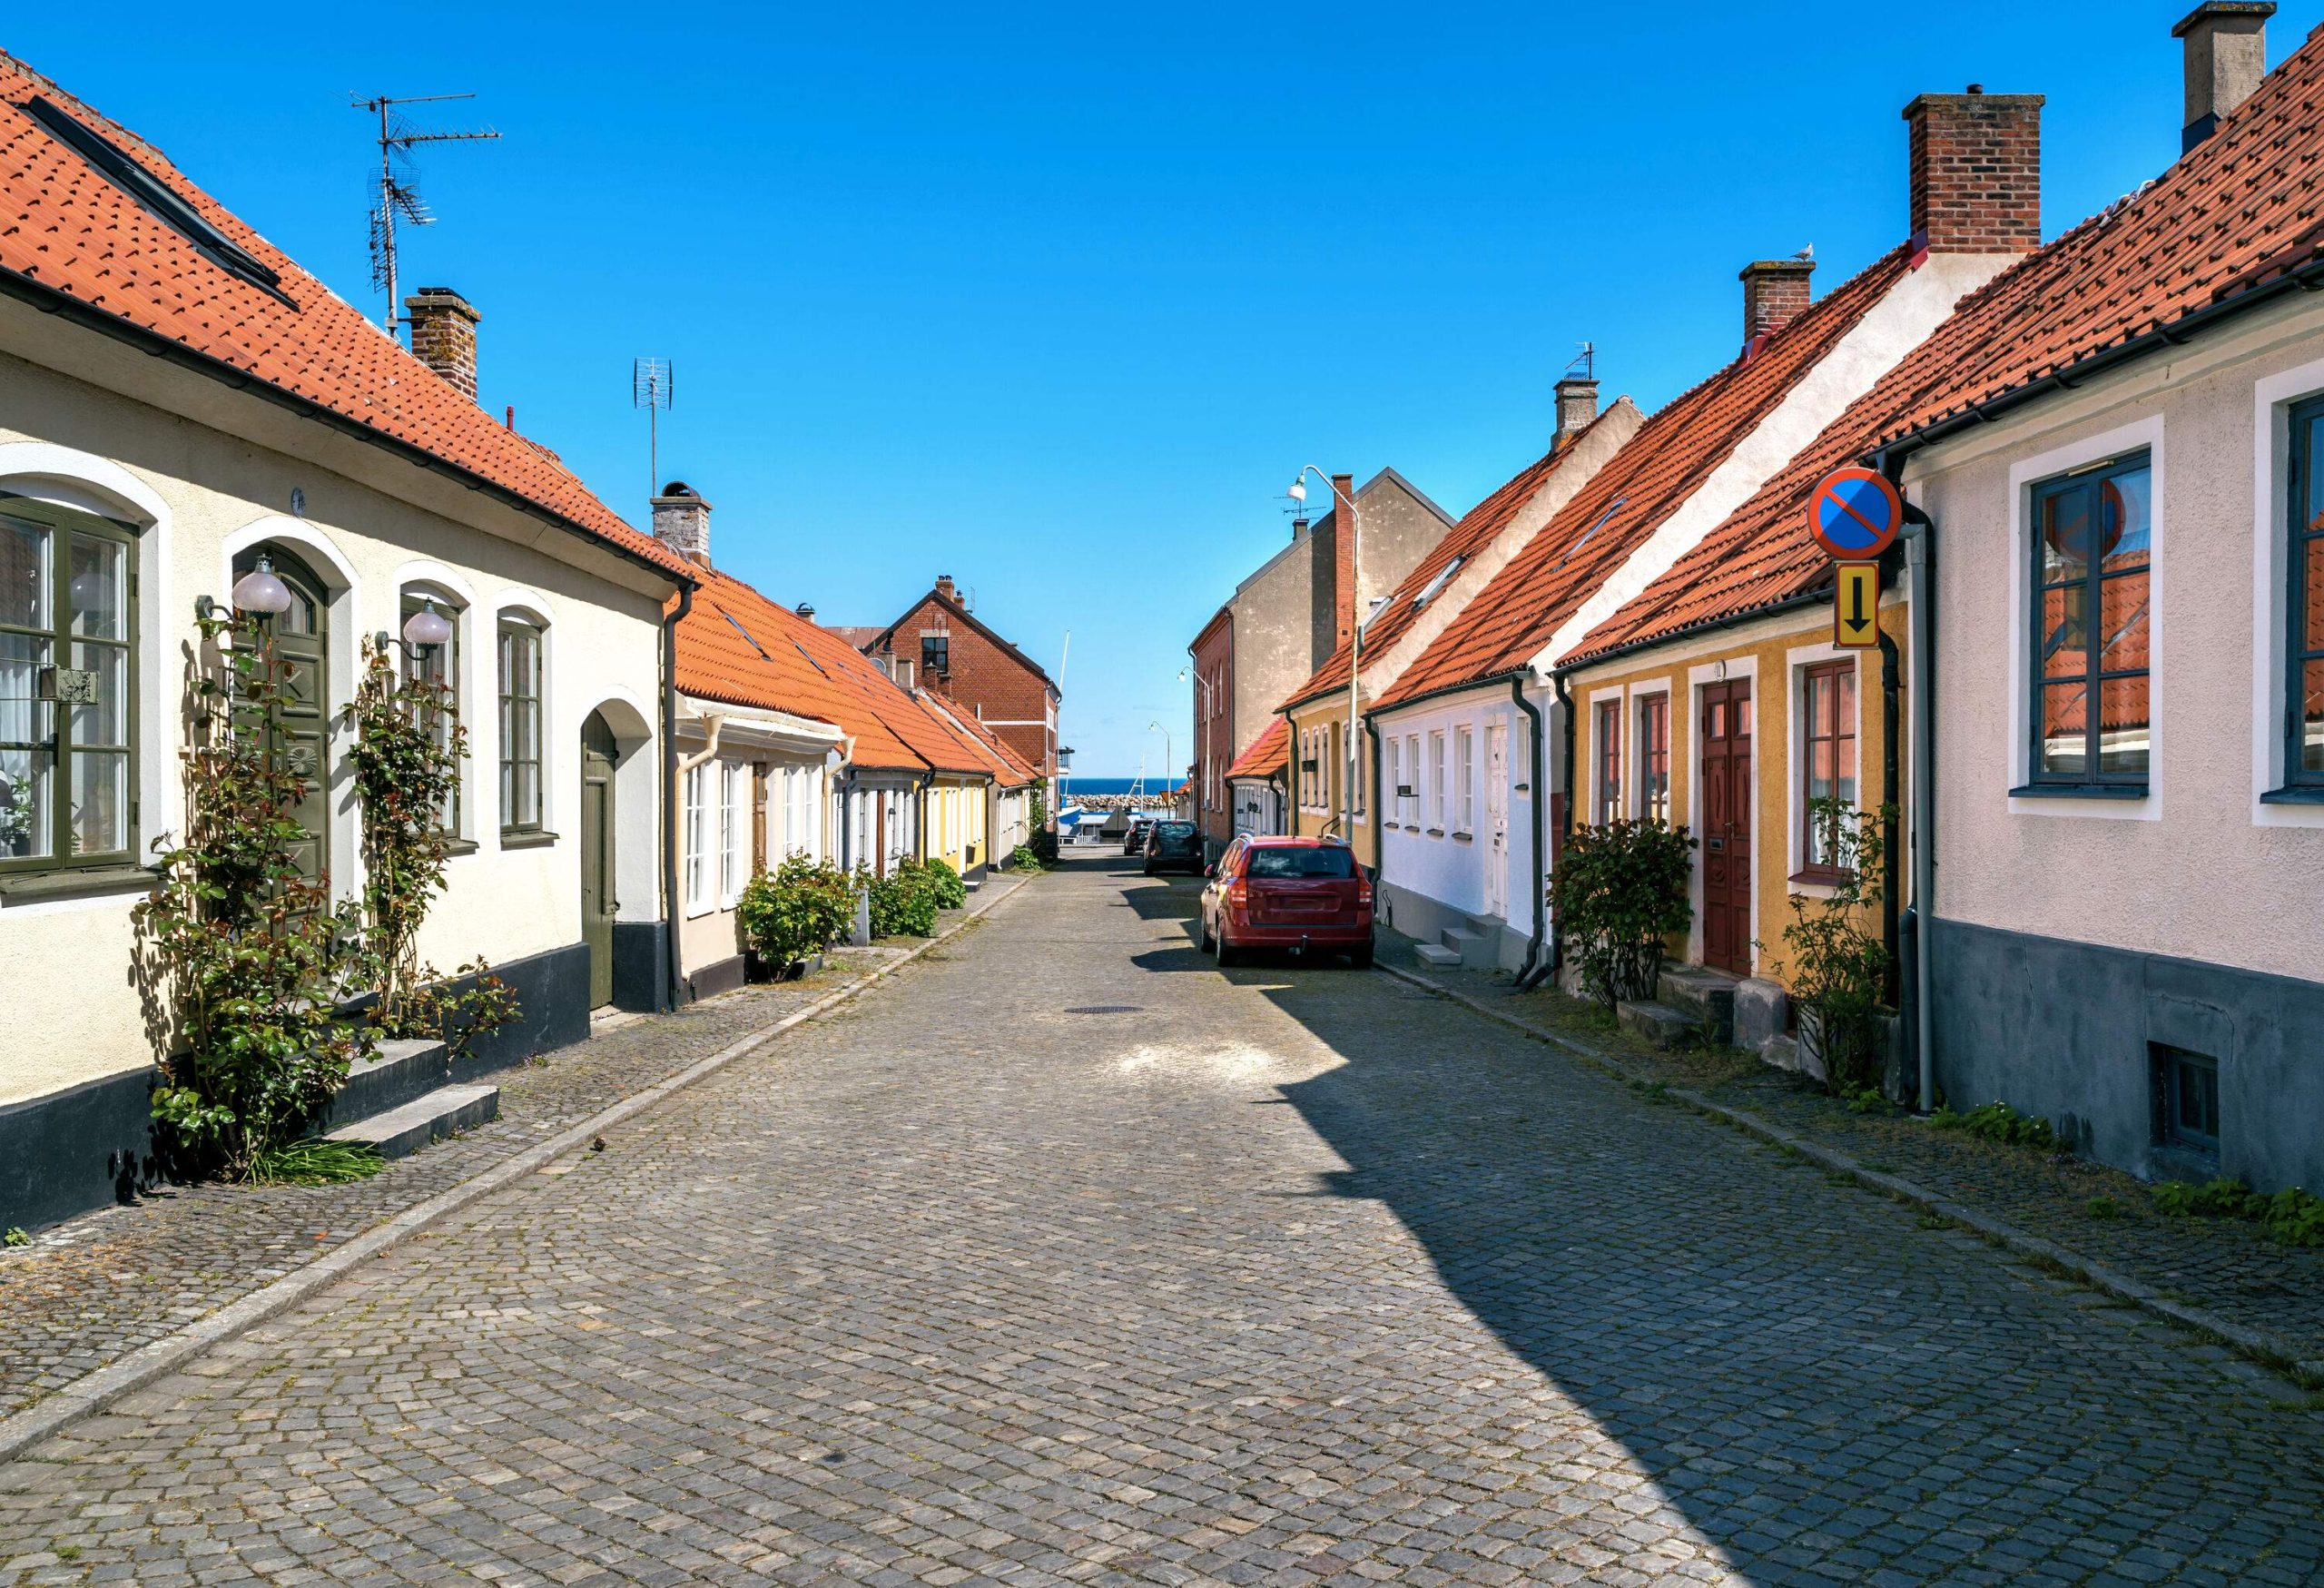 A cobbled street lined with traditional and colourful houses with red brick roofs.